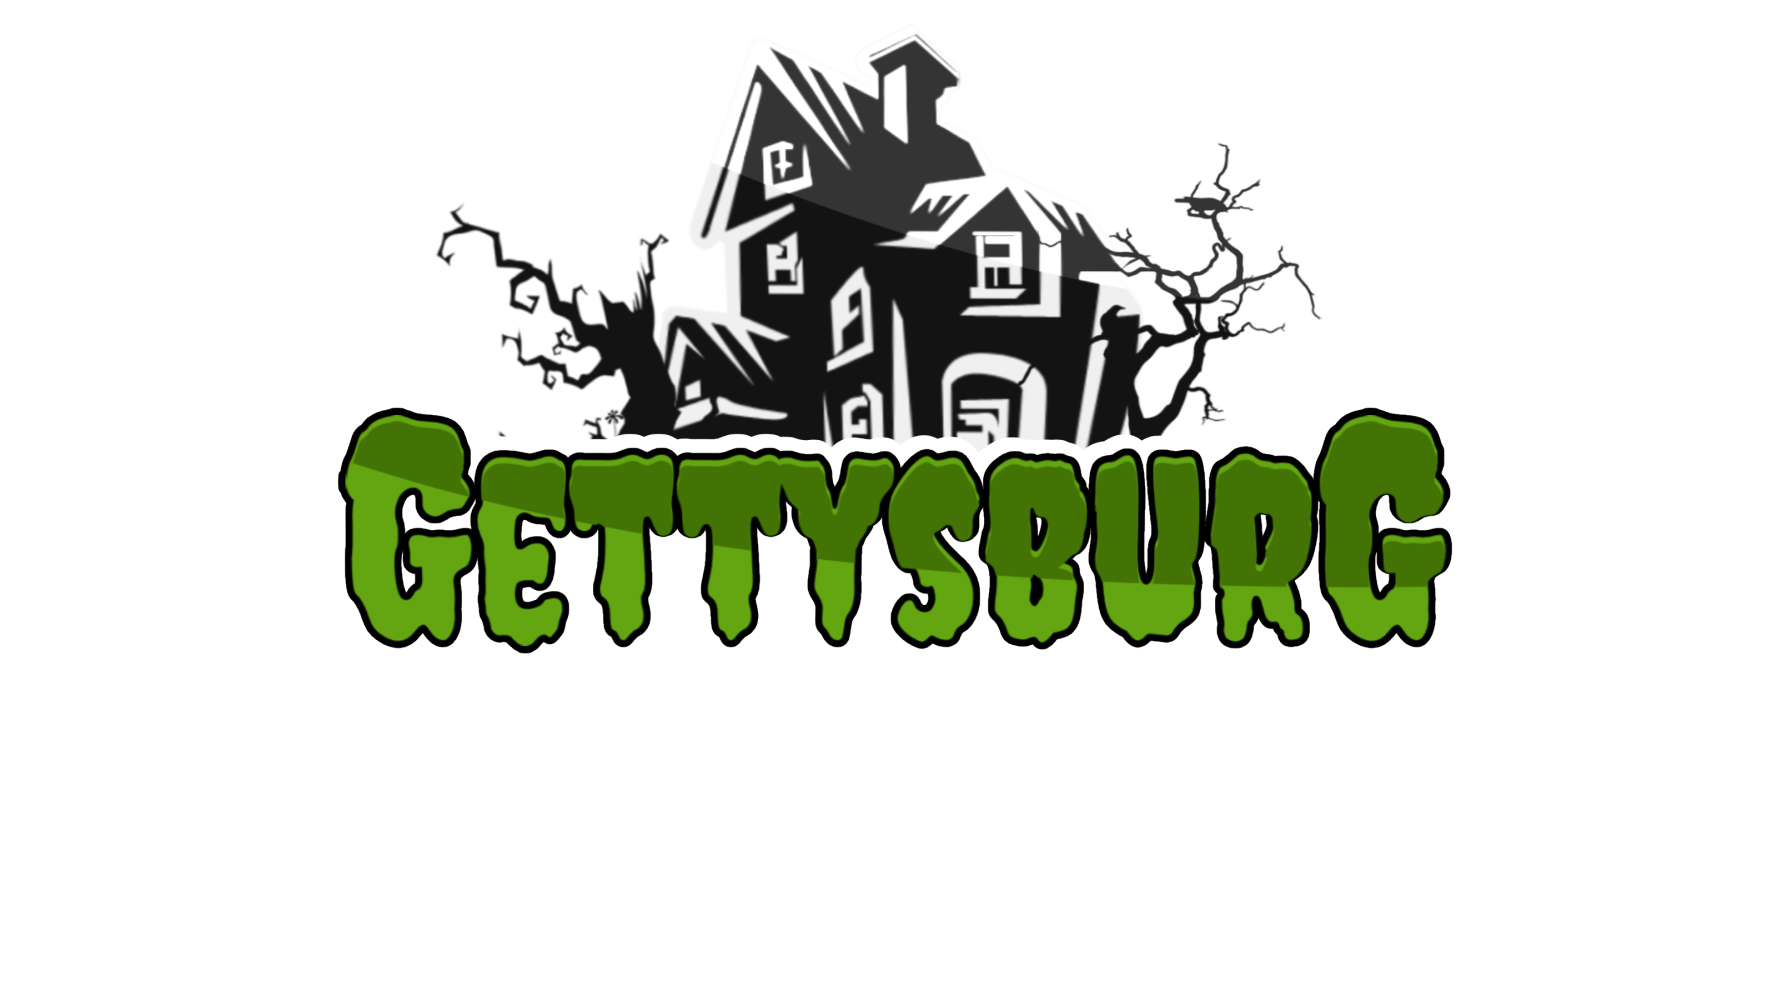 Gettysburg Museum of Haunted Objects